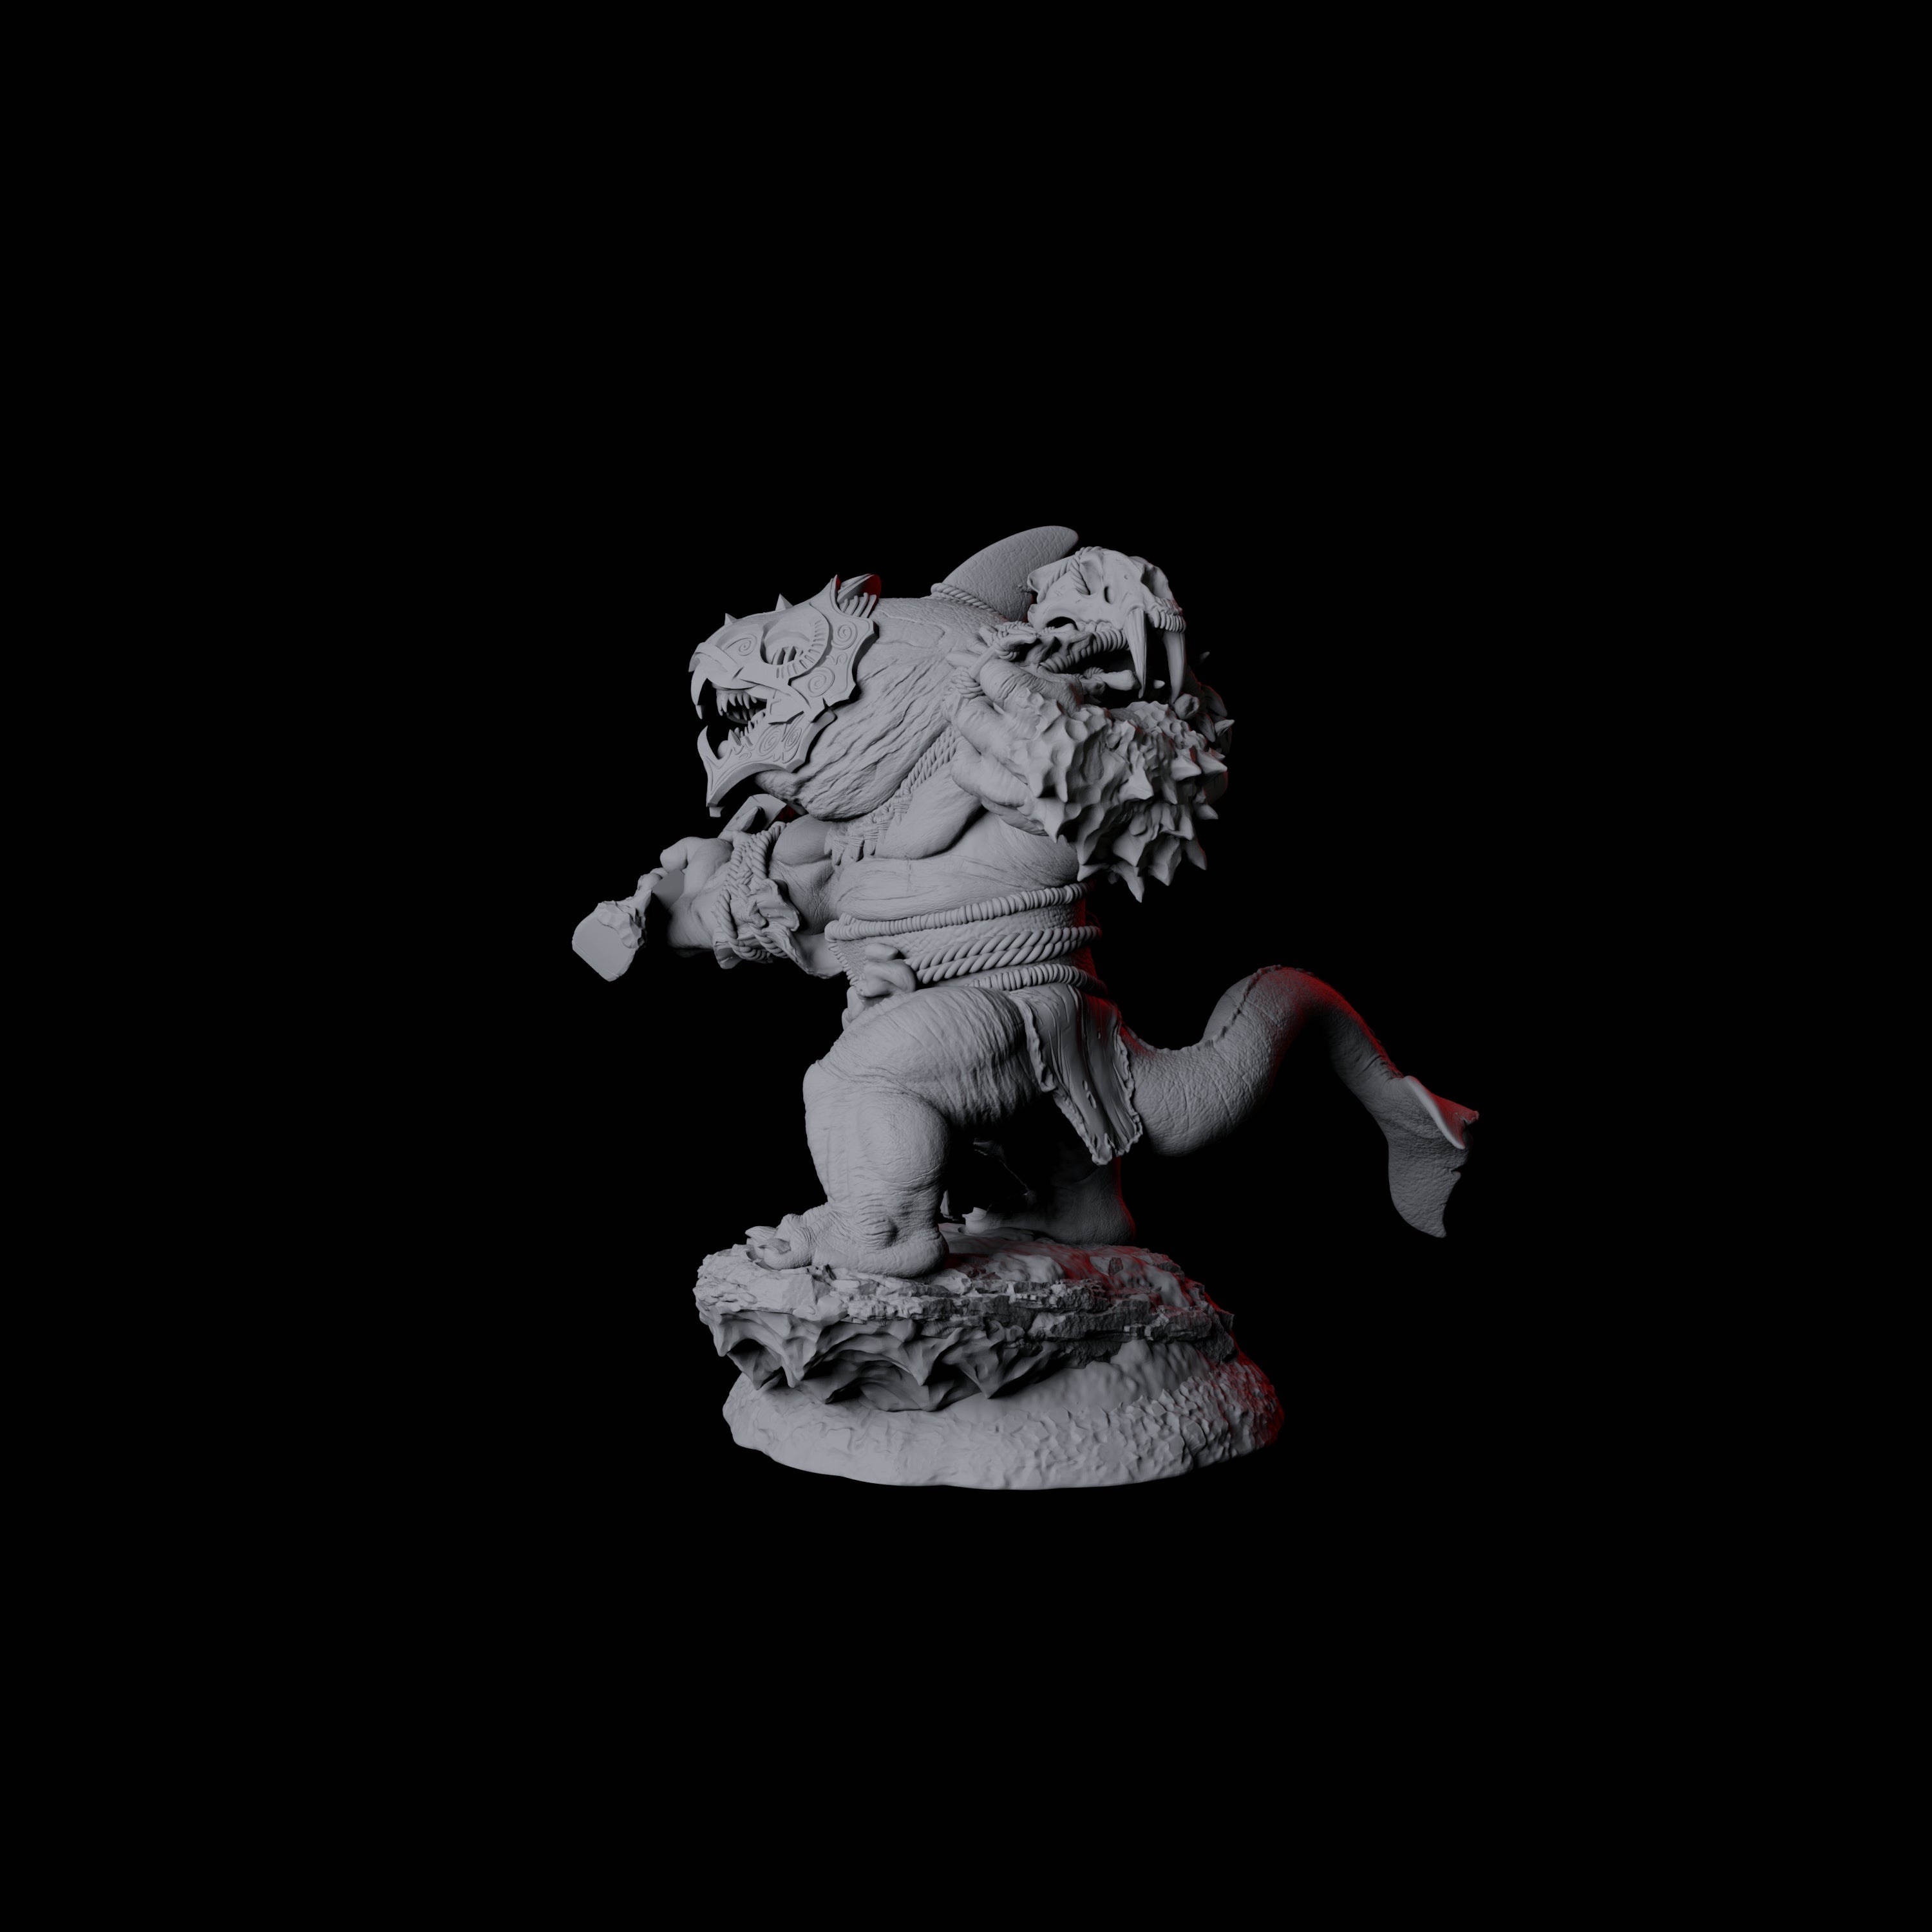 Graceful Orcafolk Warrior D Miniature for Dungeons and Dragons, Pathfinder or other TTRPGs